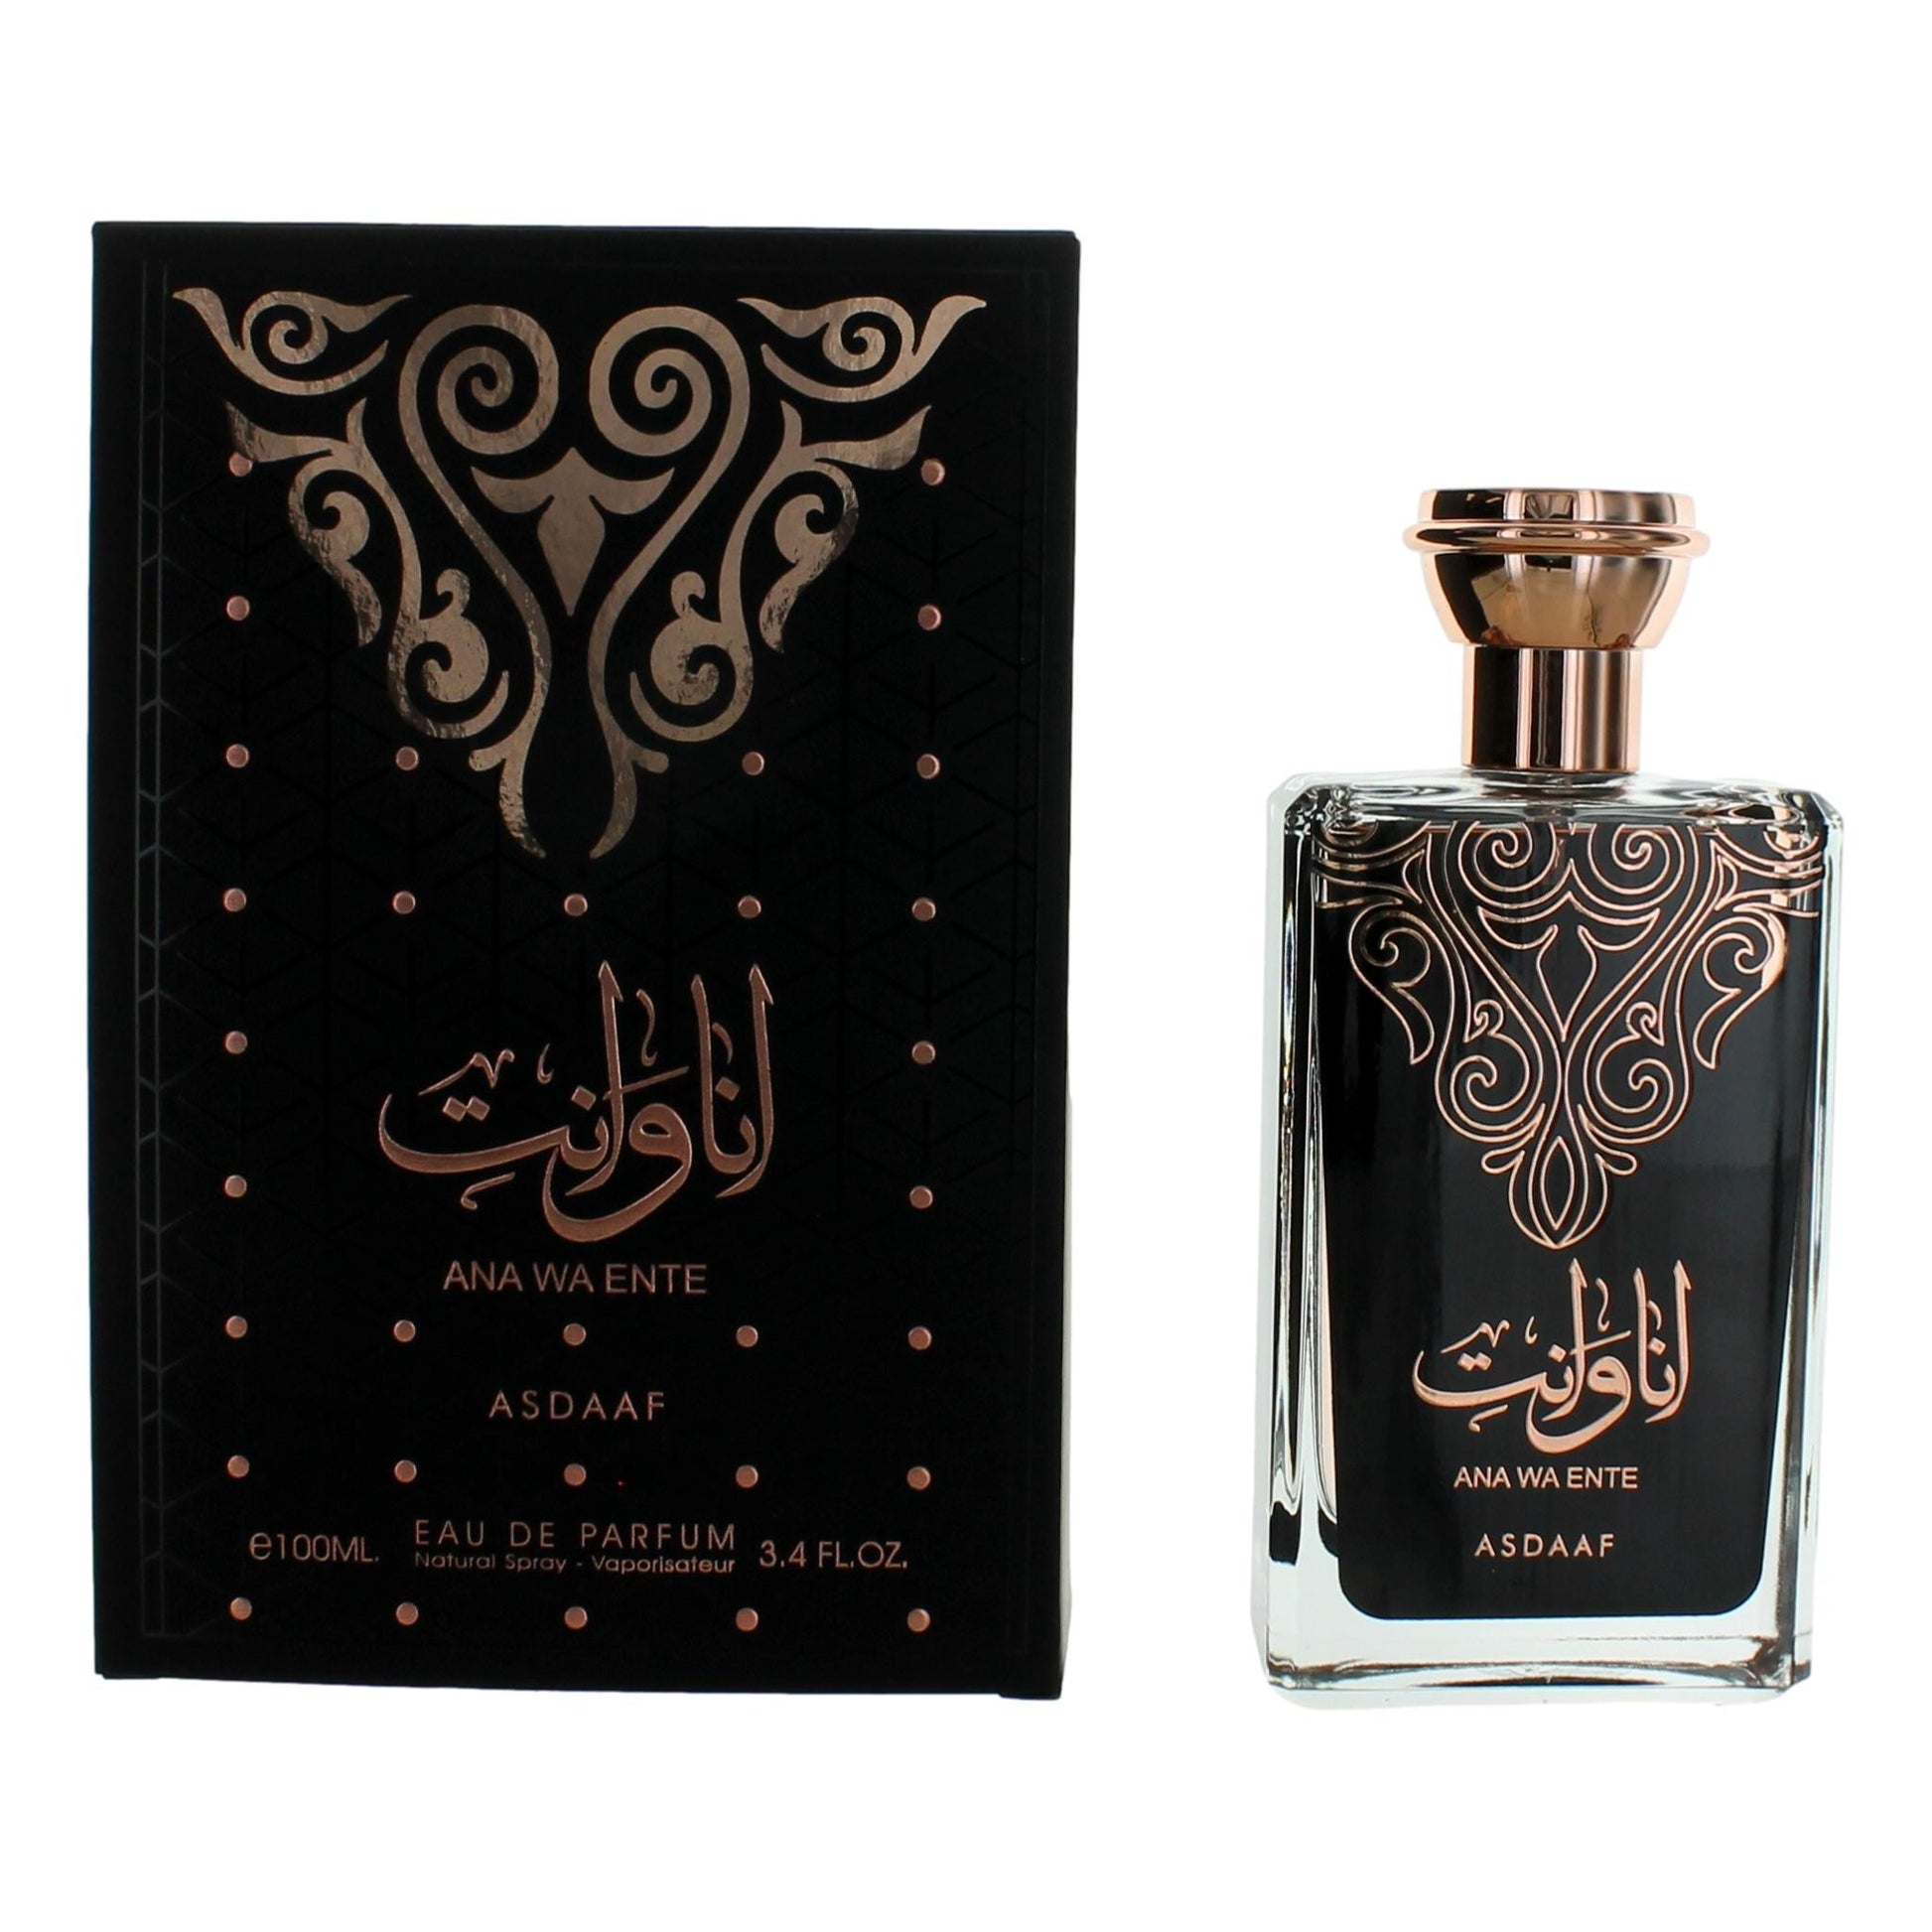 3.4 oz bottle and packaging of Ana Wa Ente by Asdaaf